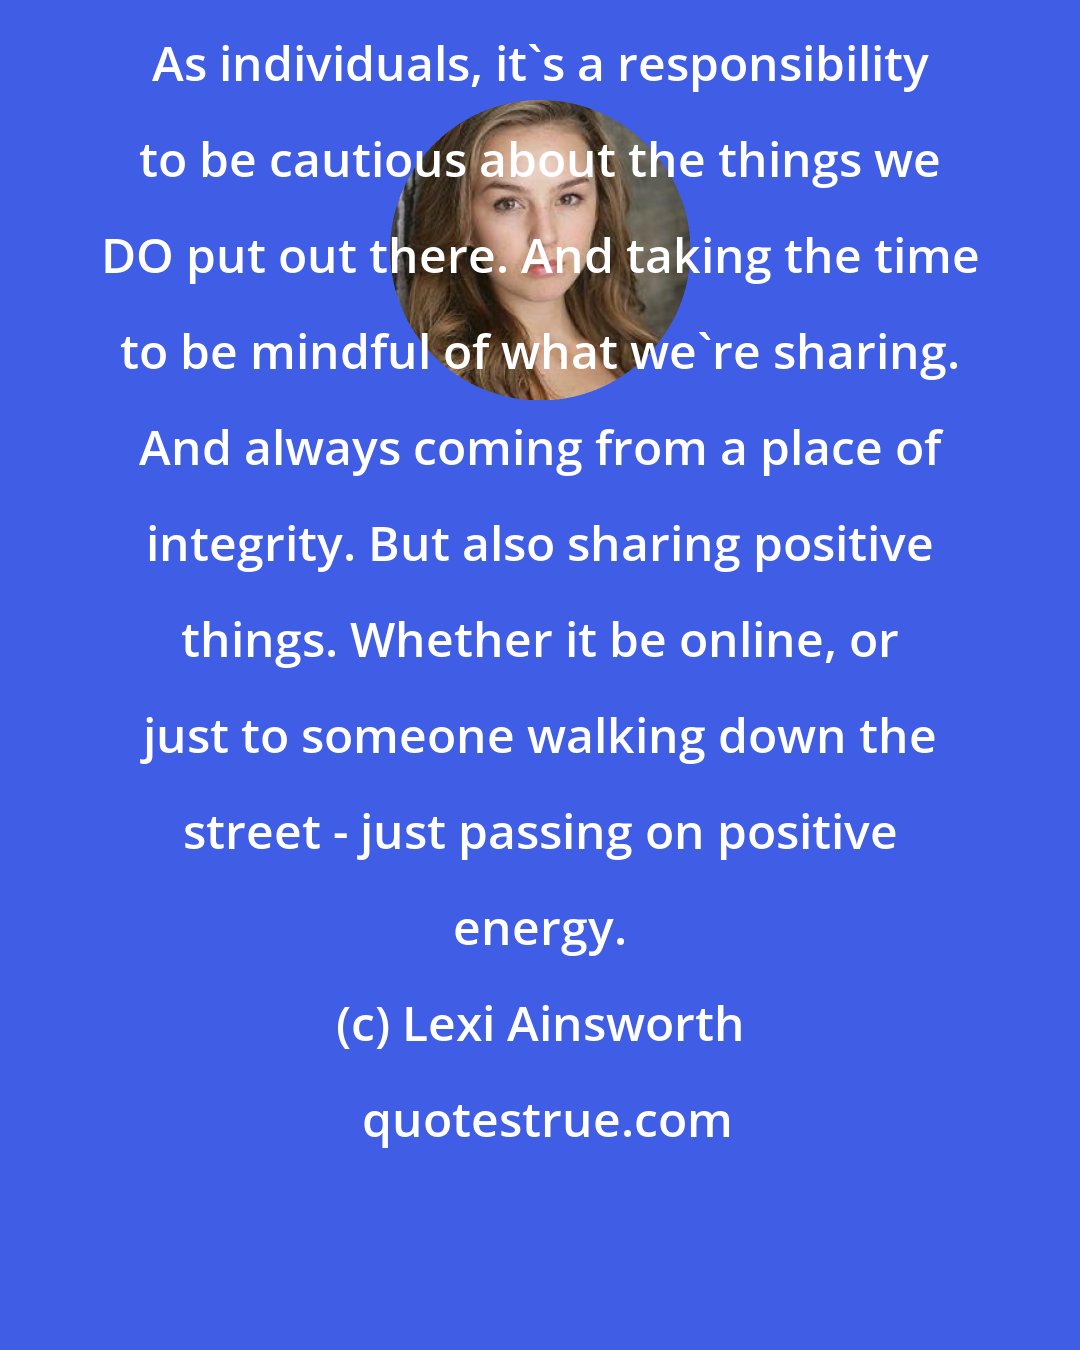 Lexi Ainsworth: As individuals, it's a responsibility to be cautious about the things we DO put out there. And taking the time to be mindful of what we're sharing. And always coming from a place of integrity. But also sharing positive things. Whether it be online, or just to someone walking down the street - just passing on positive energy.